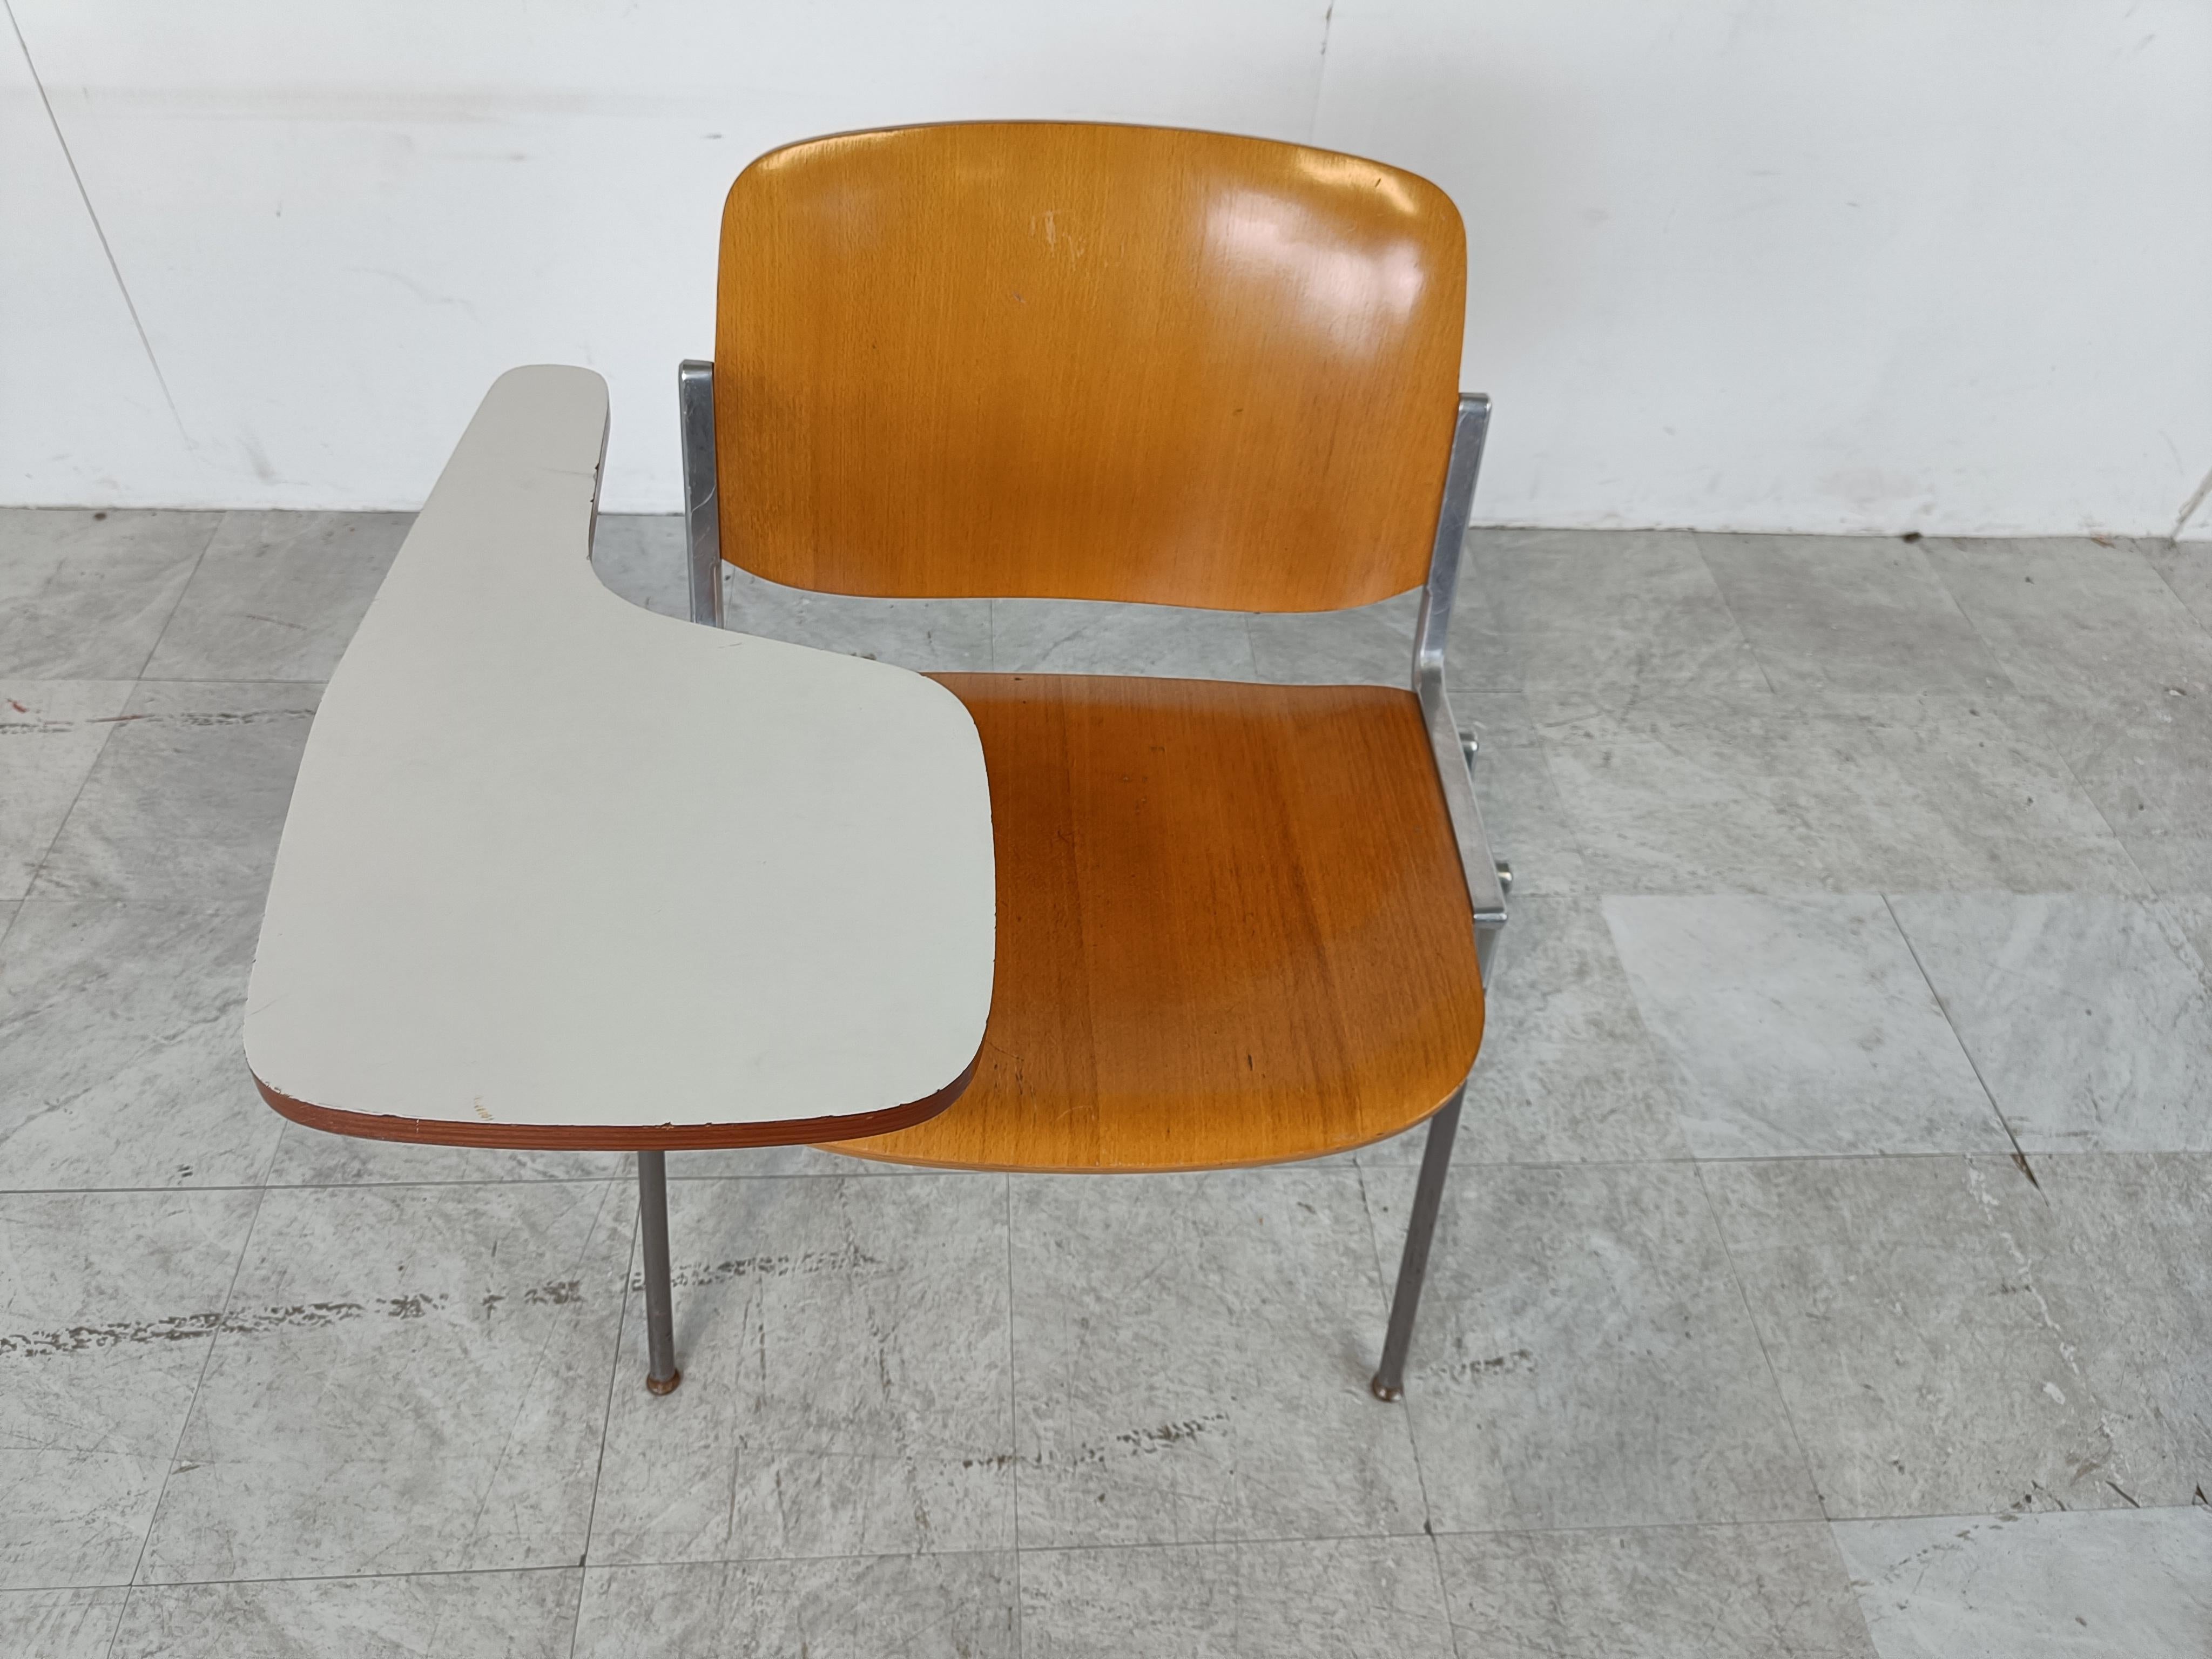 Vintage Dsc 106 Chair by Giancarlo Piretti for Castelli with Folding Table, 1970 For Sale 2